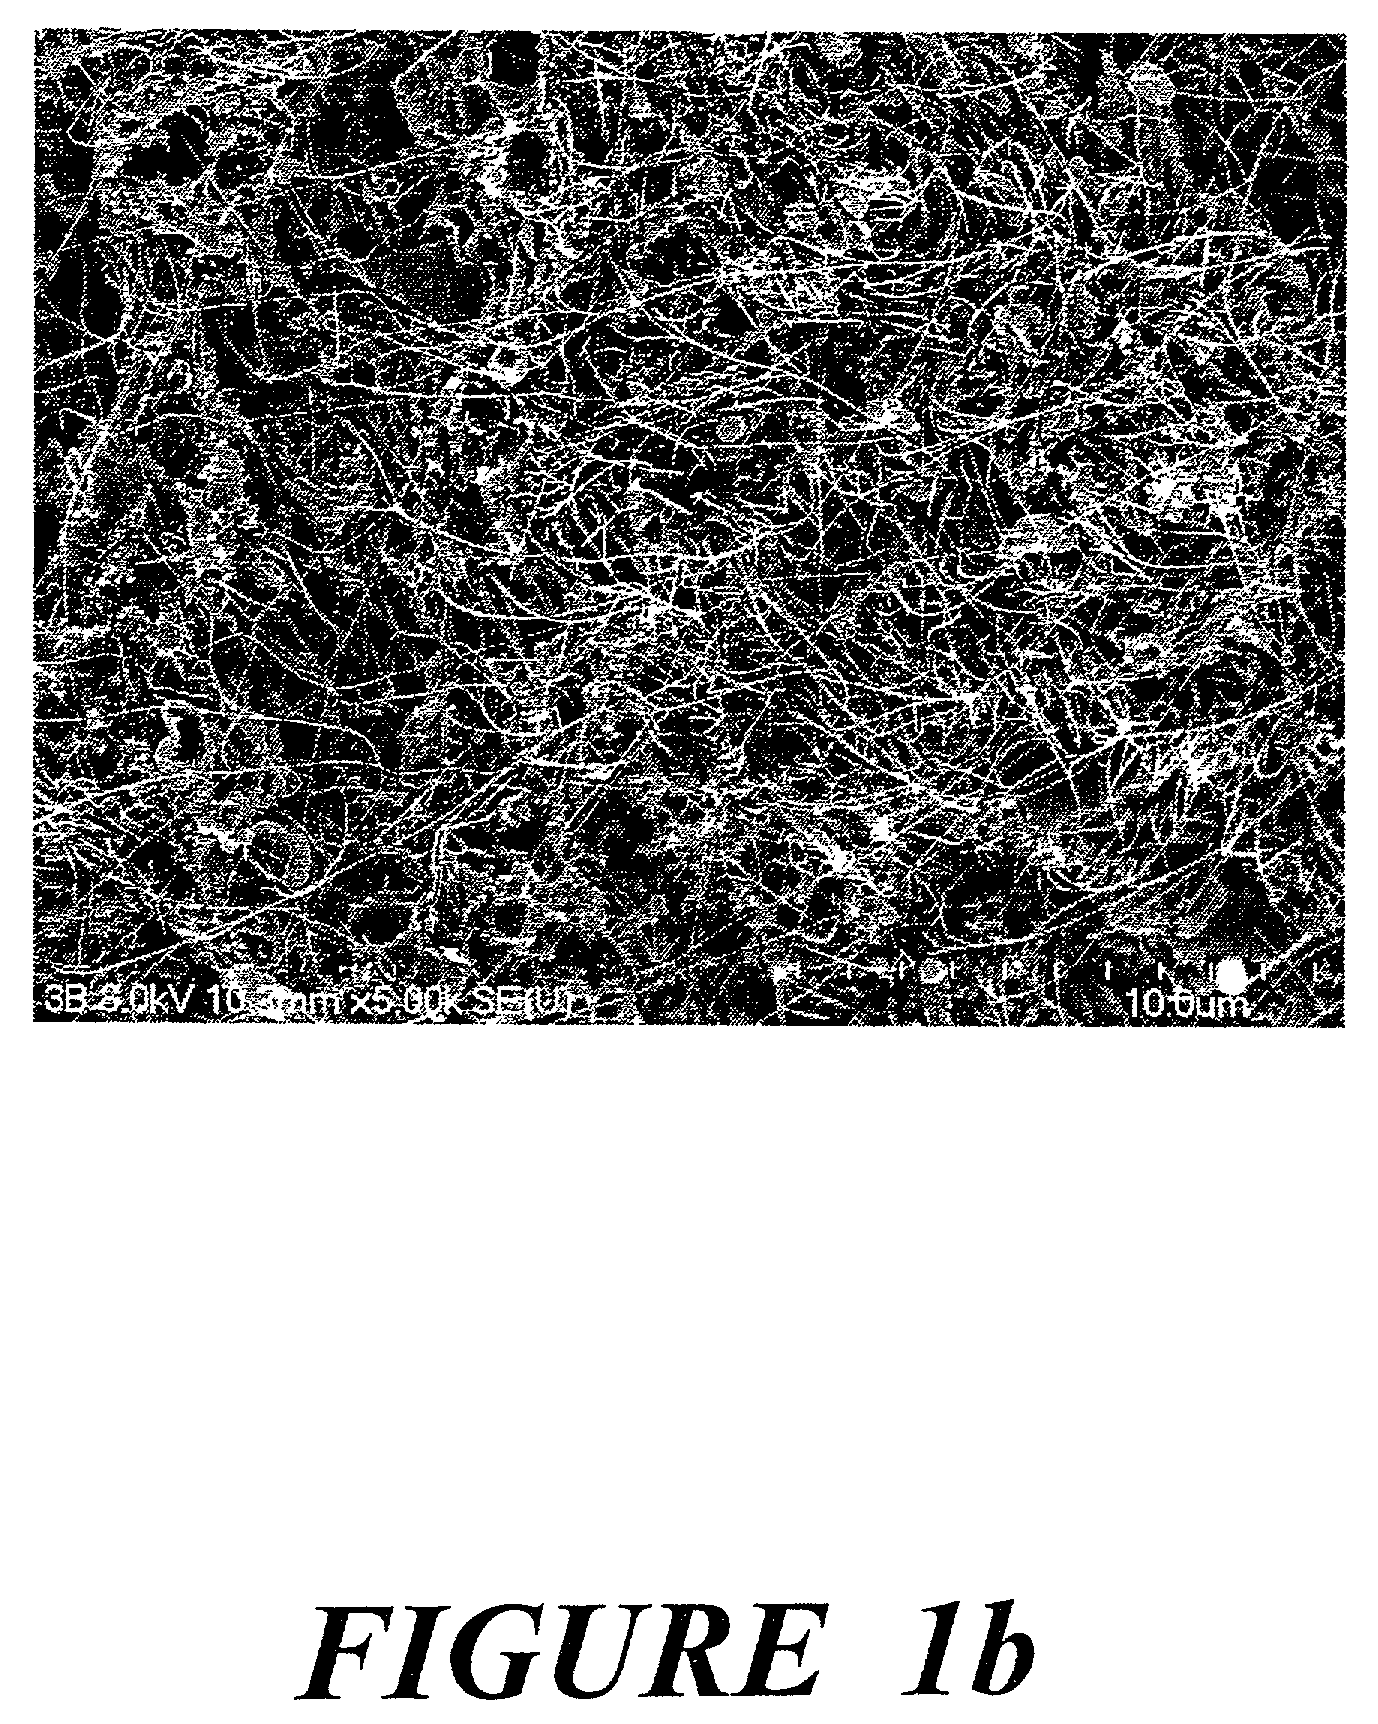 Halogen containing-polymer nanocomposite compositions, methods, and products employing such compositions